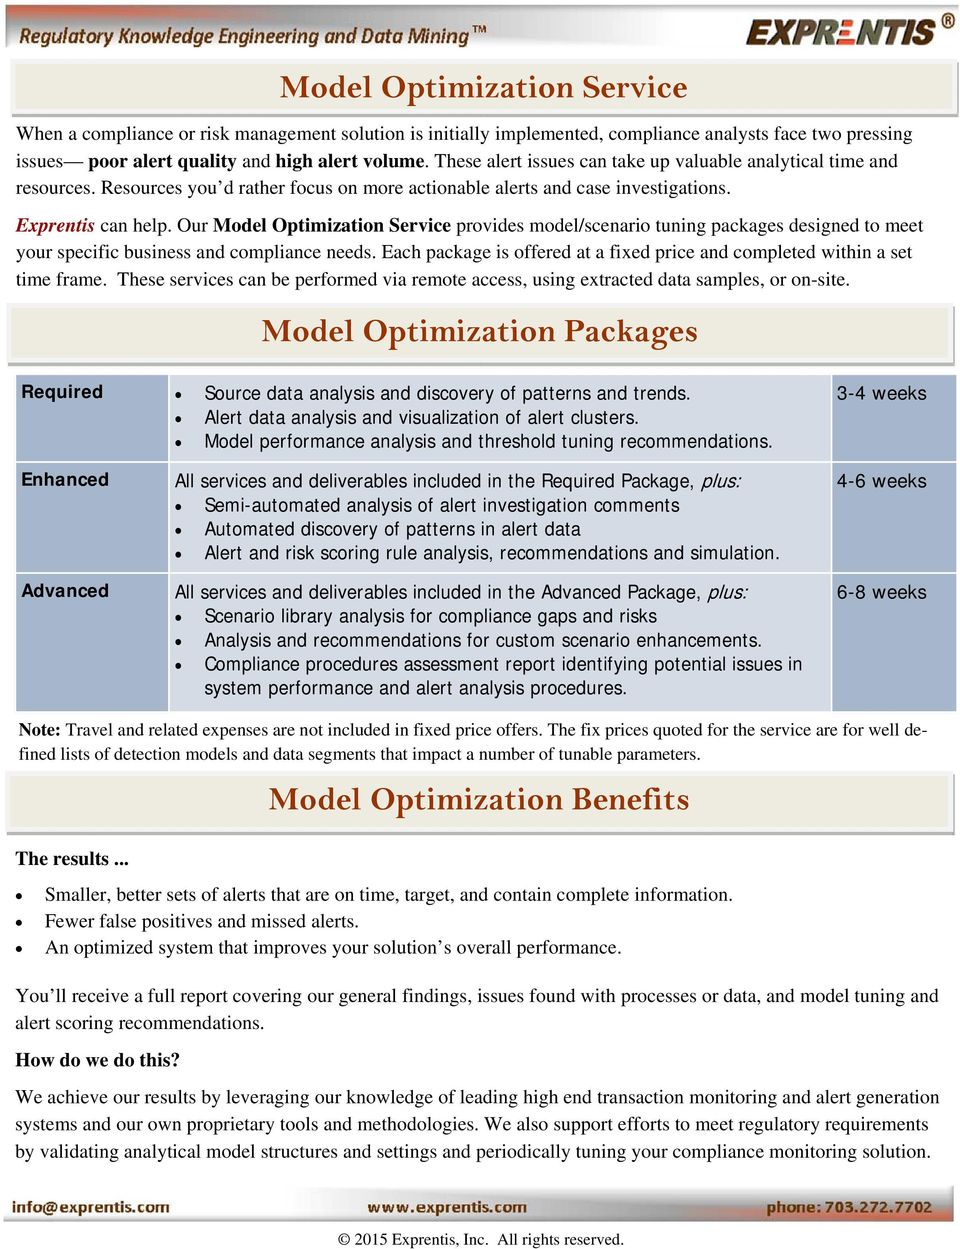 Our Model Optimization Service provides model/scenario tuning packages designed to meet your specific business and compliance needs.